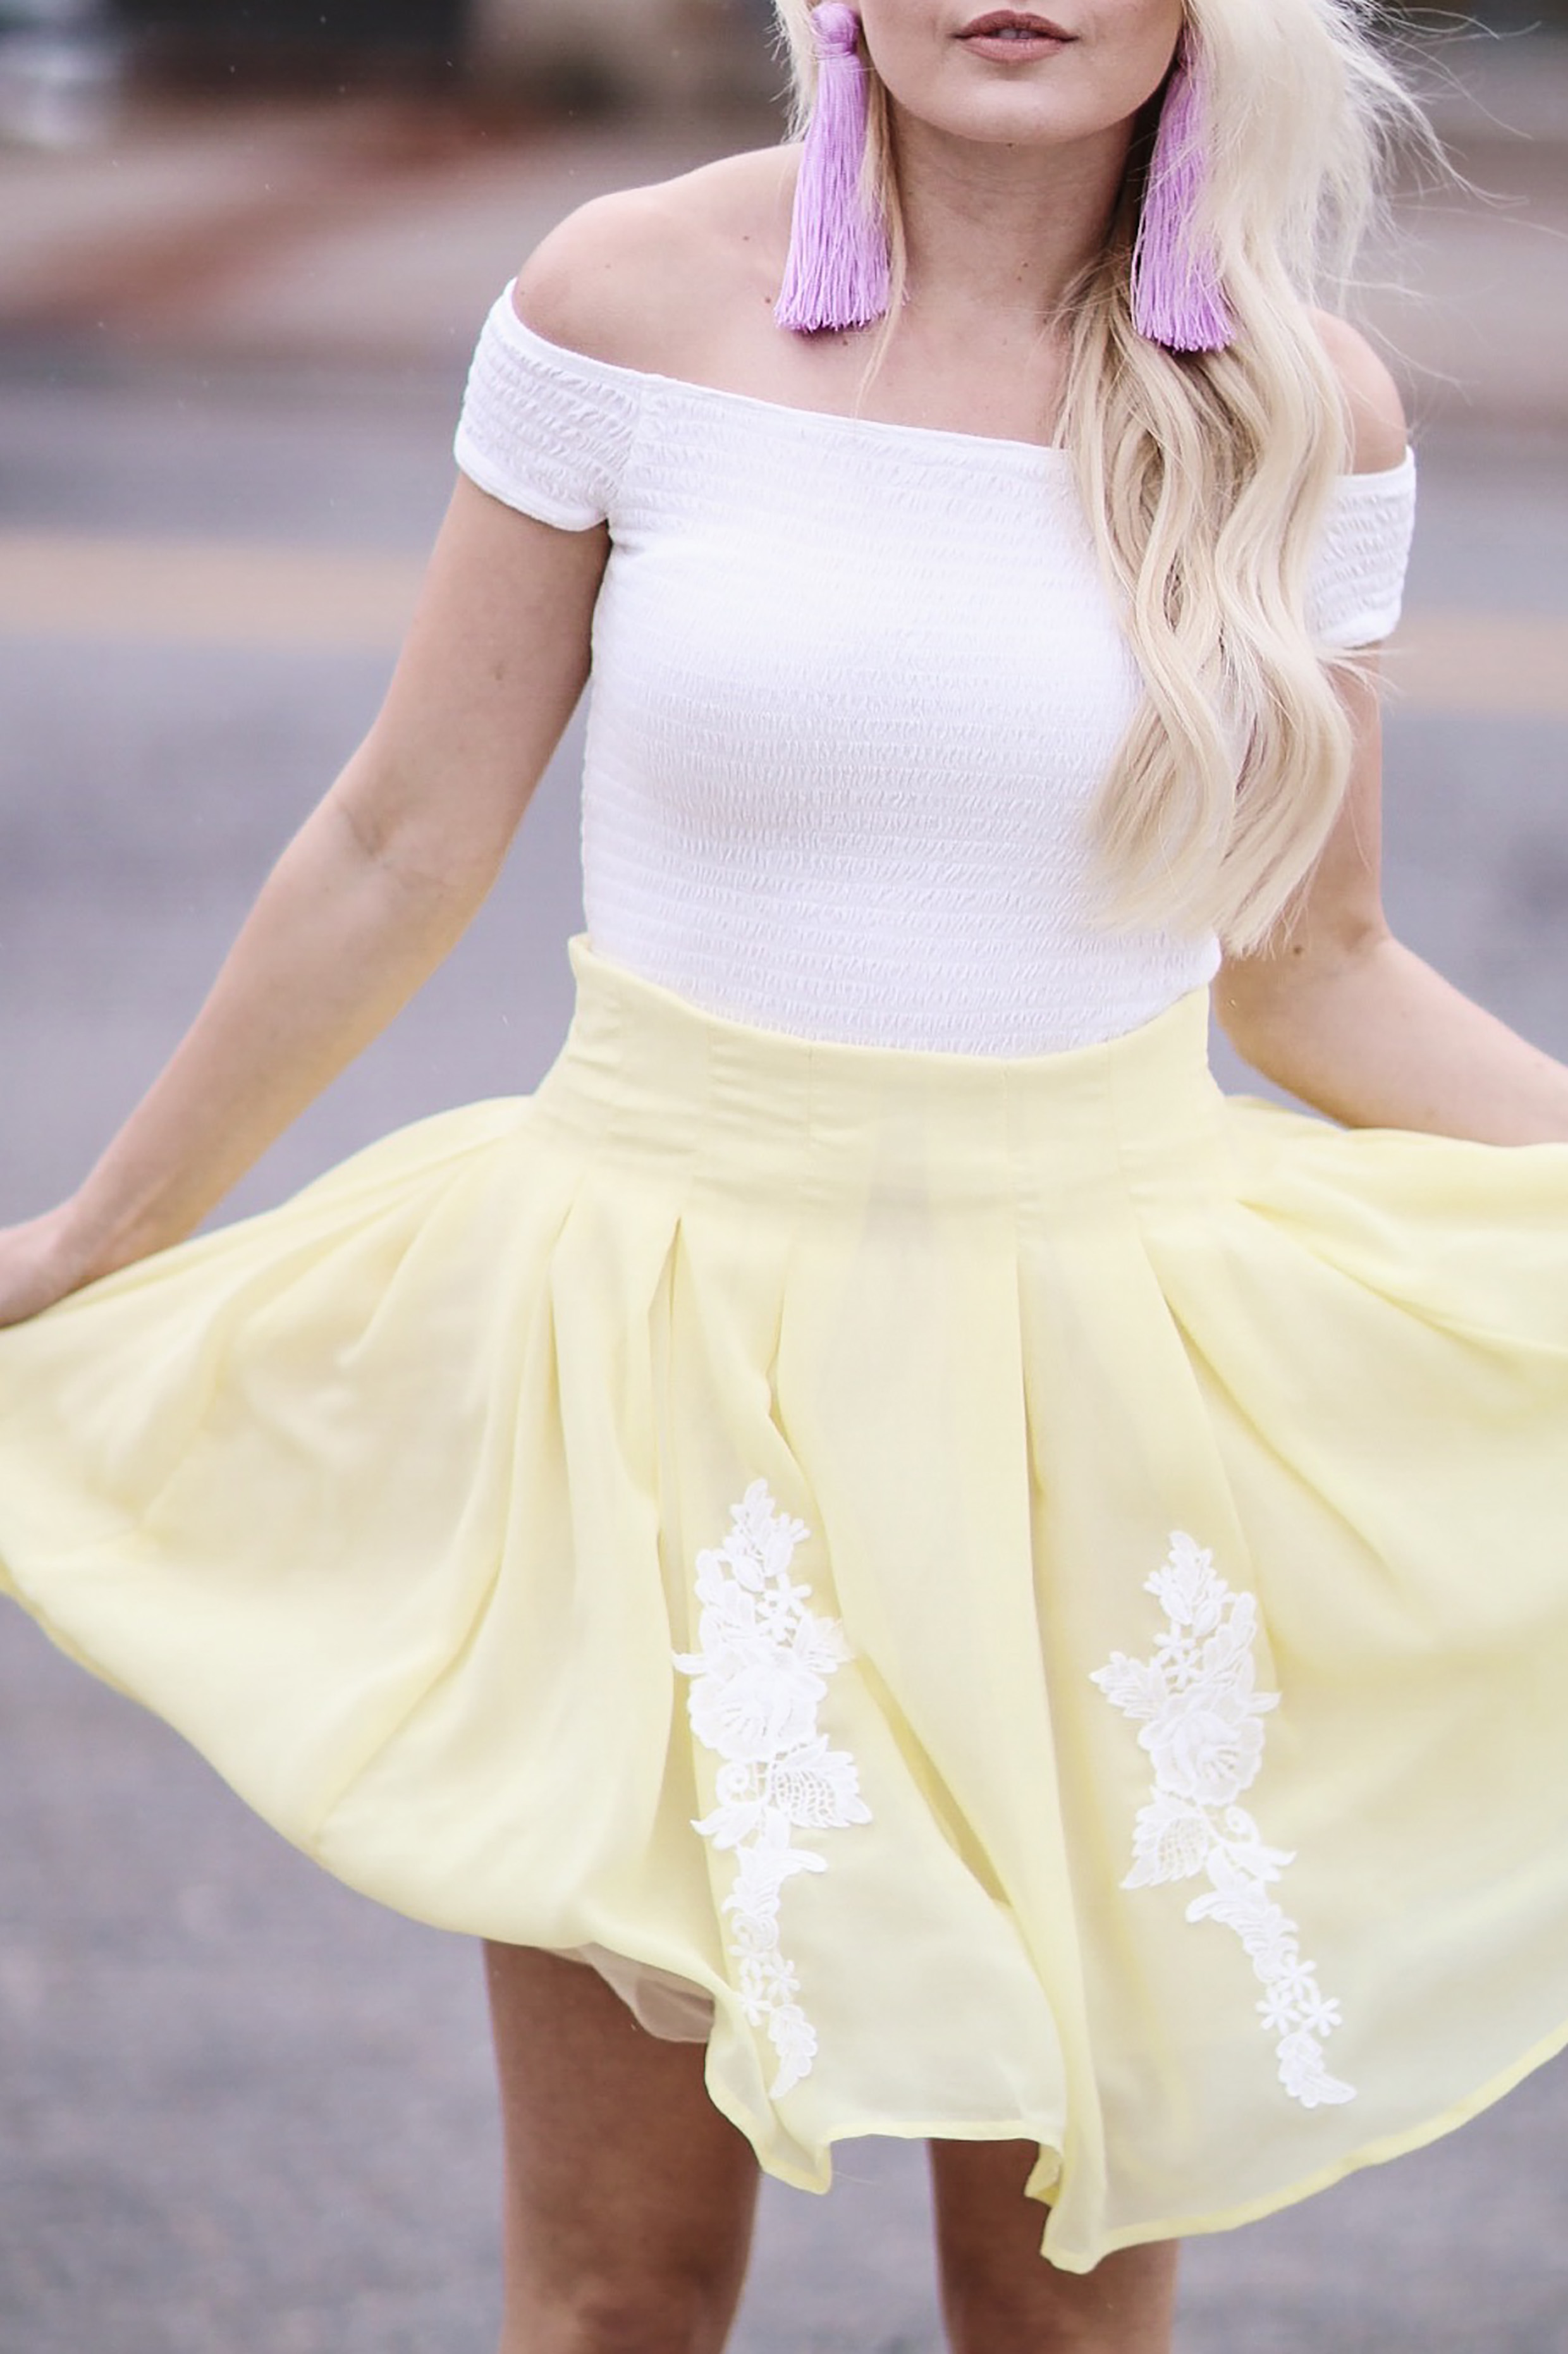 Alena Gidenko from modaprints.com styles a yellow lace skirt with an off shoulder white top for Spring and Summer